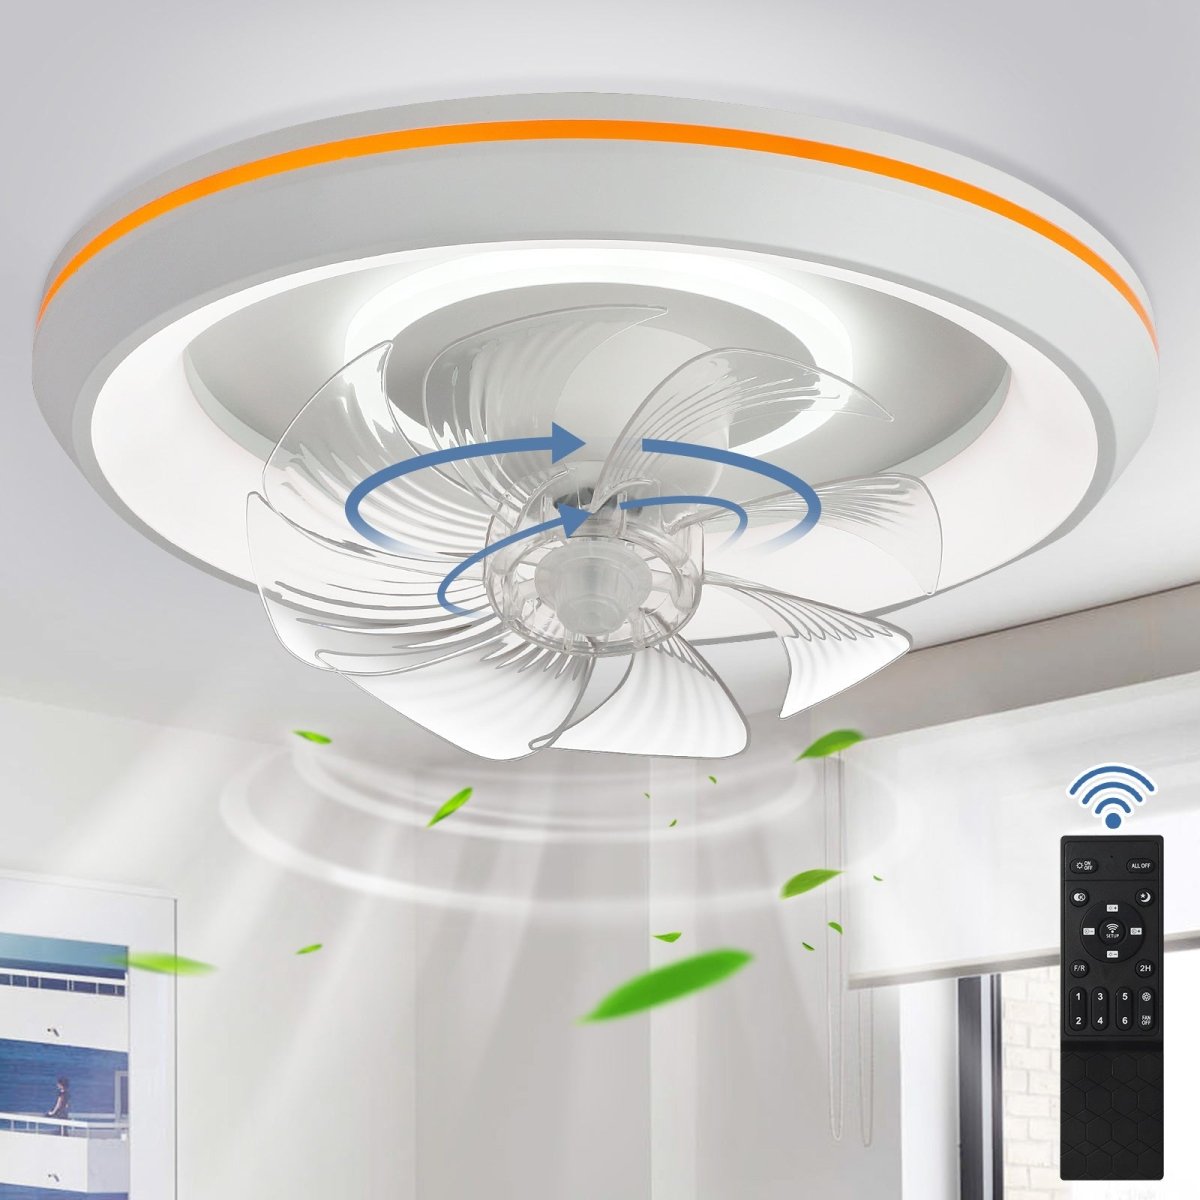 DLLT Modern 360-Degree Rotation Low Profile Ceiling Fans with Lights and Remote, Dimmable LED Reversible Timing, Ceiling Fans with Lights 3 Colors 6 Speeds Bladeless for Bedroom, Kitchen, 19’’, White - WS-FPZ54-30C-WH 1 | DEPULEY